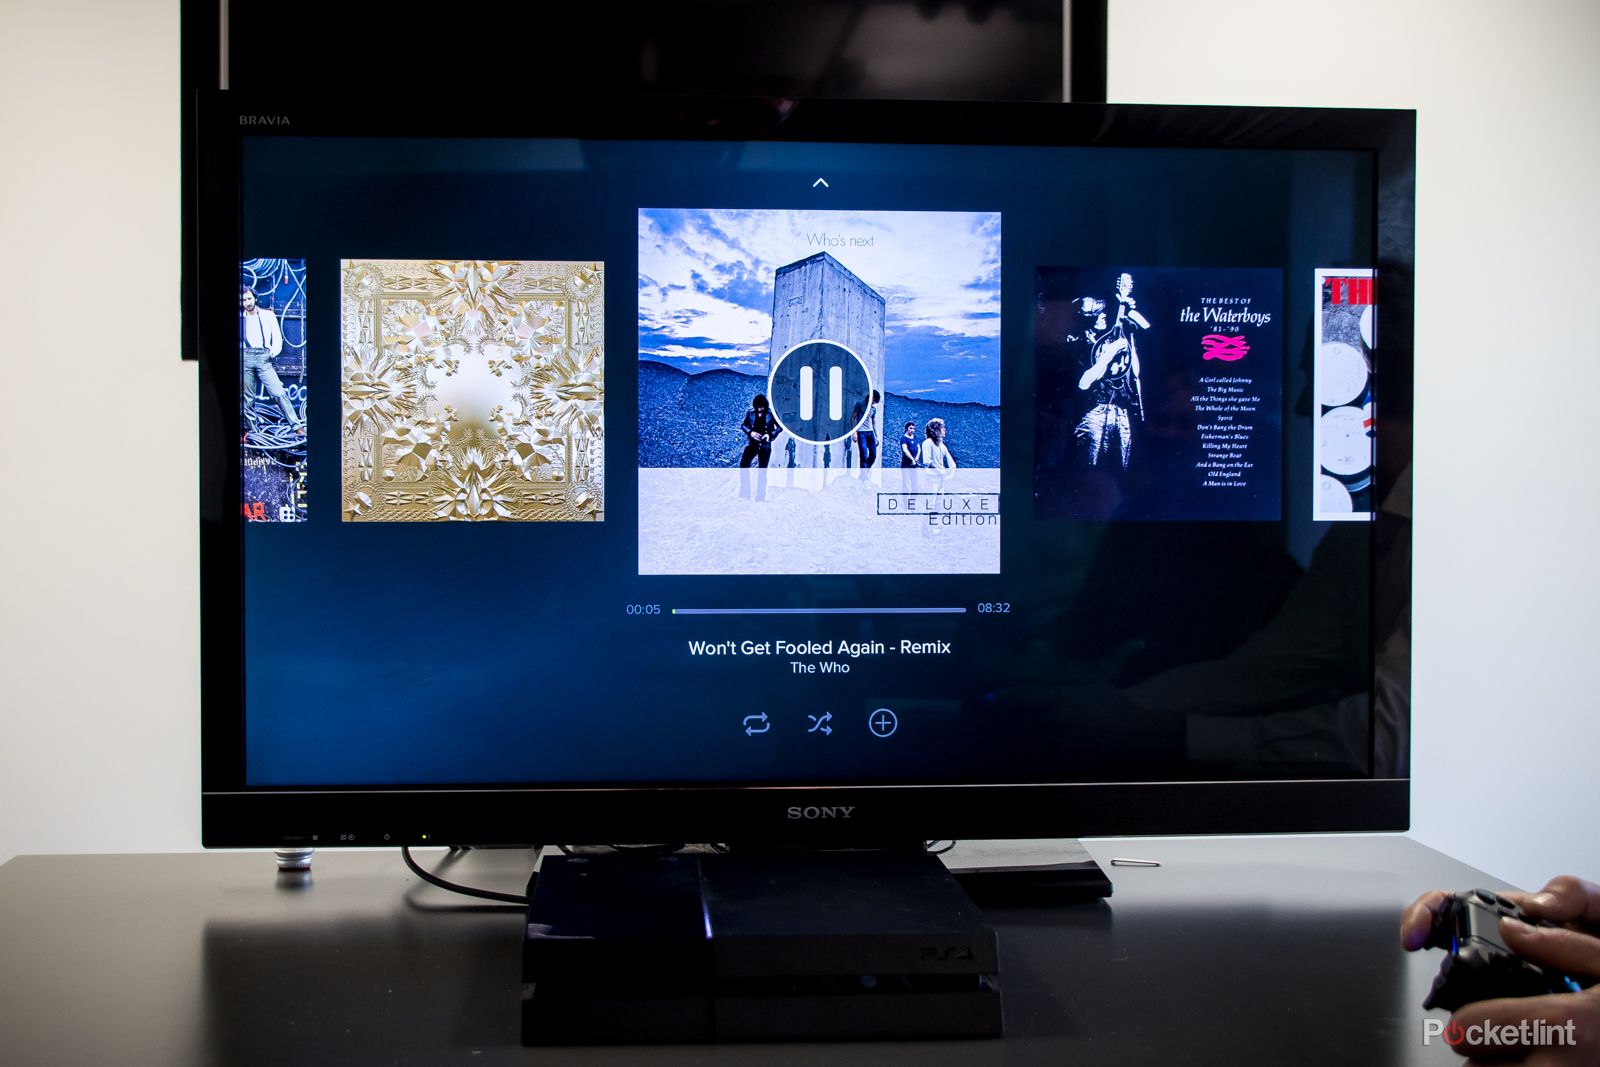 spotify on playstation music now available for ps4 and ps3 what does it offer image 4